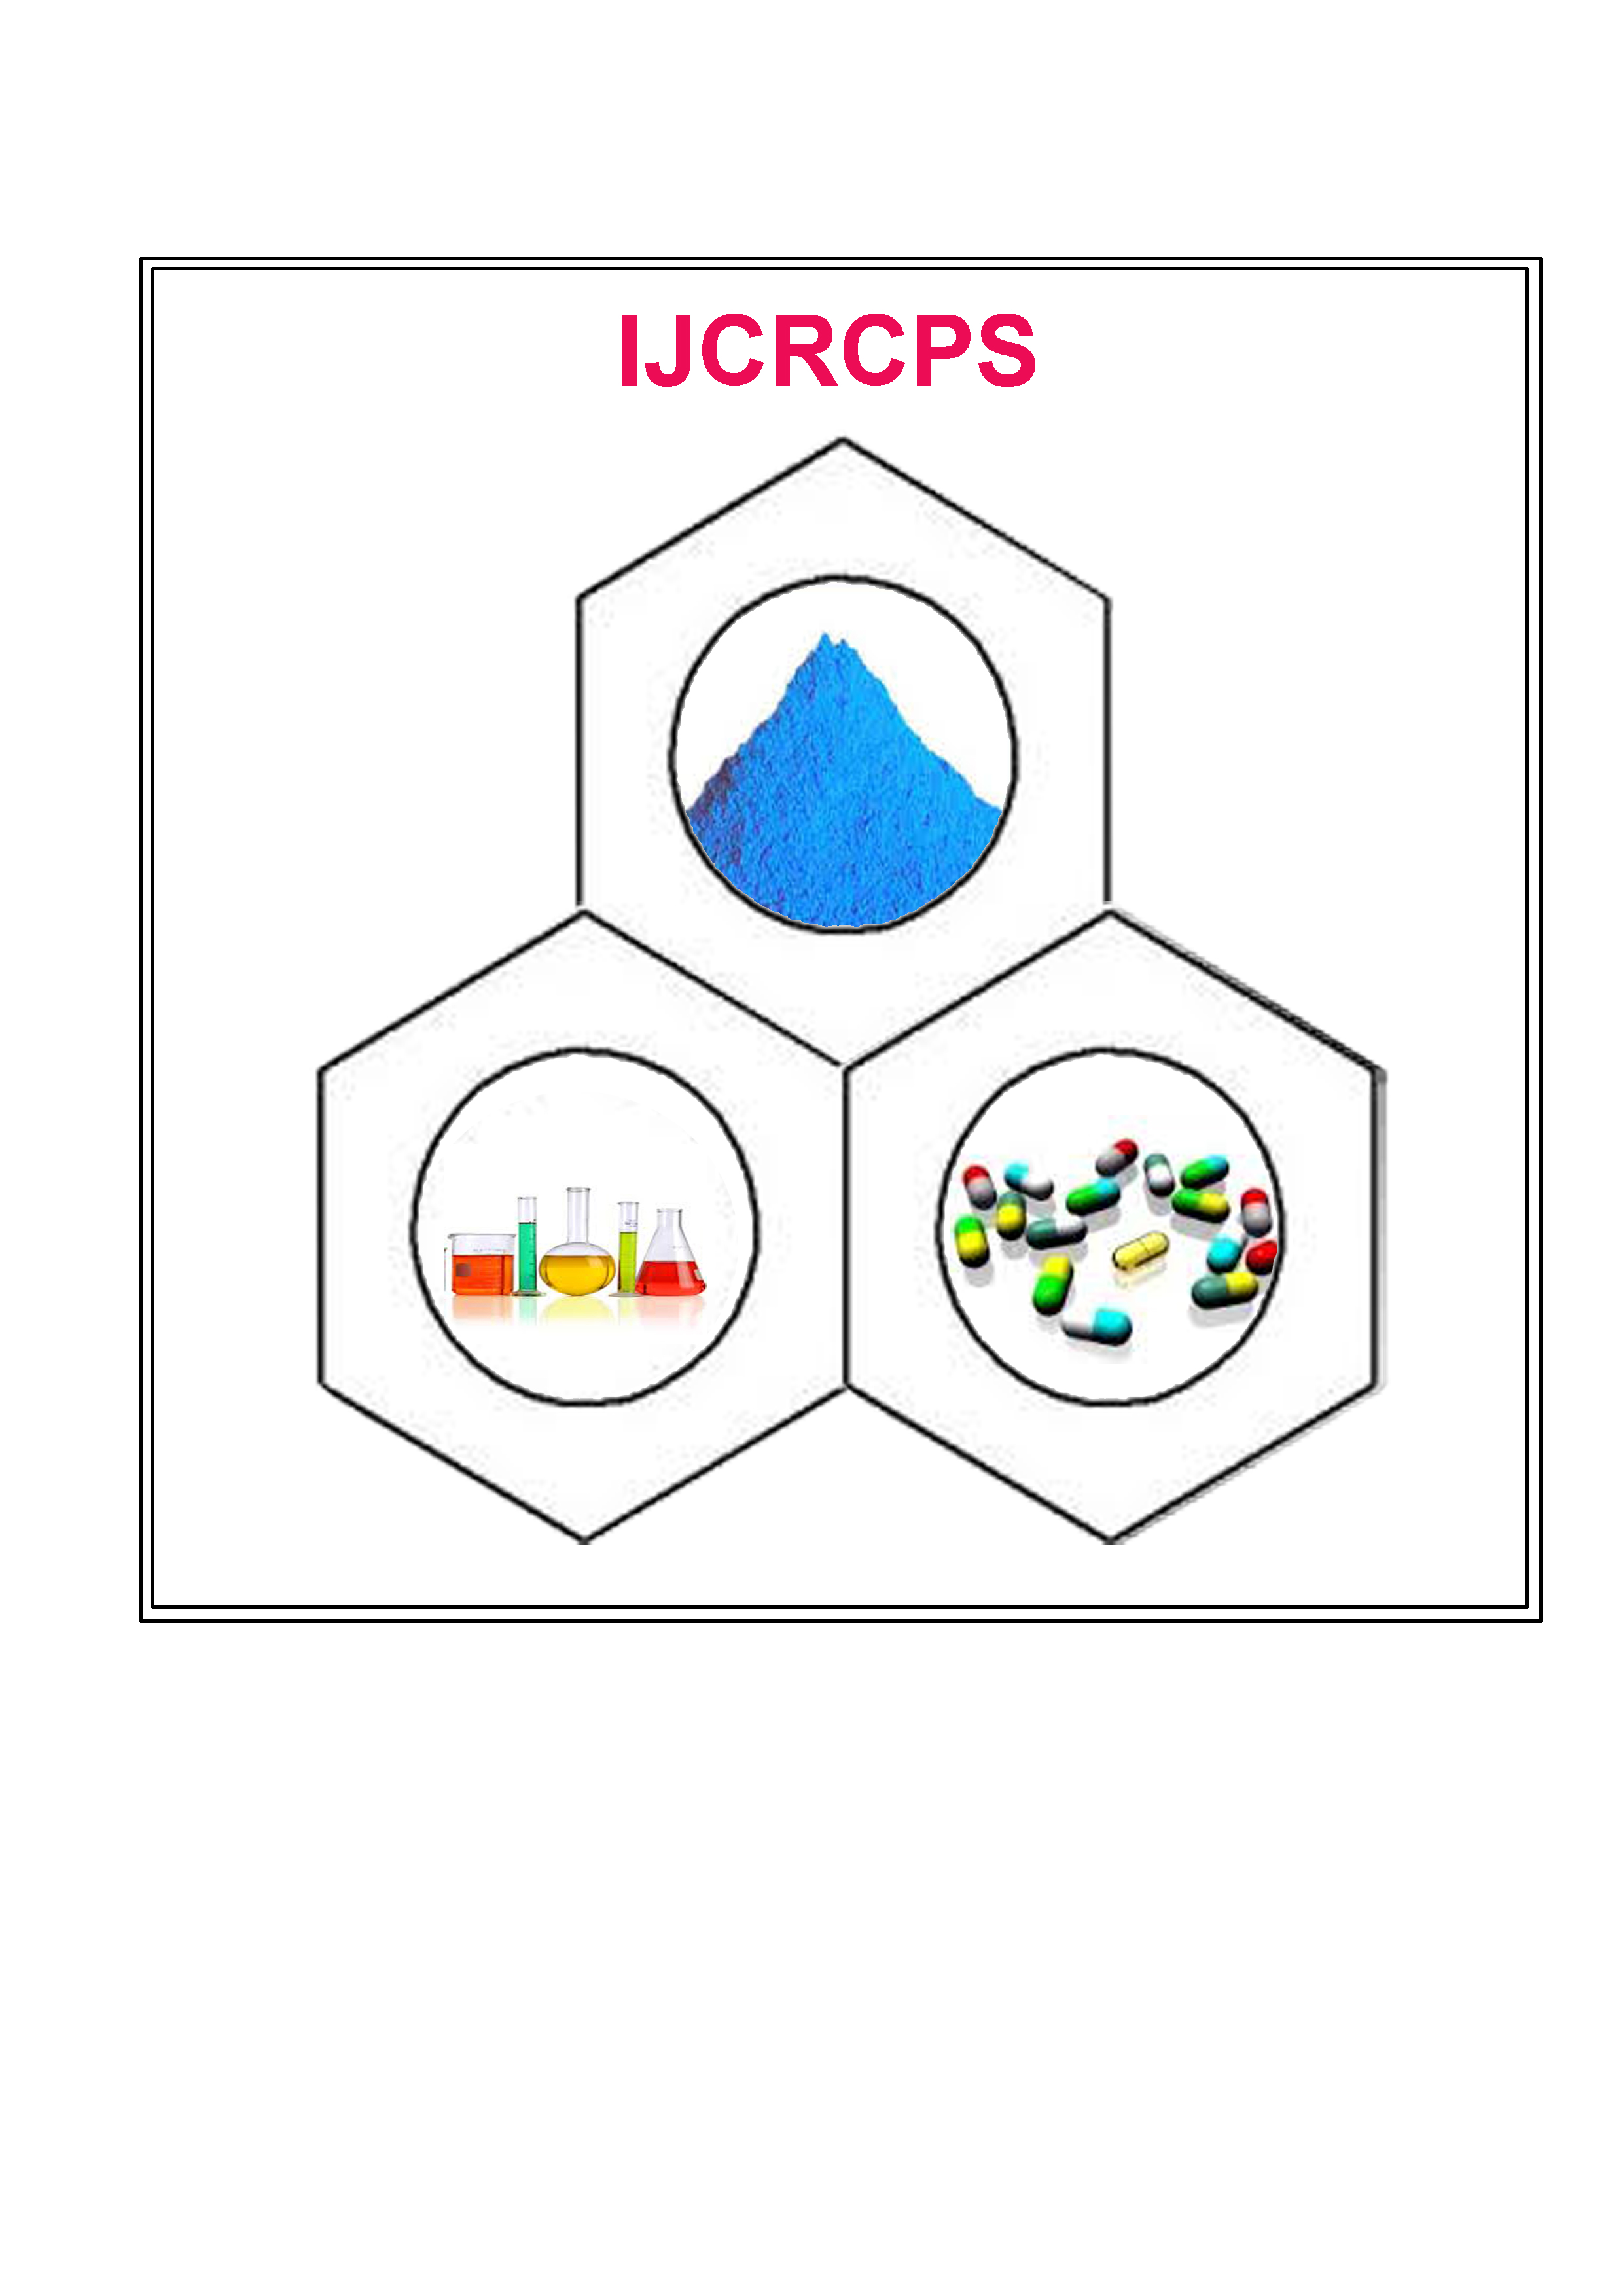 International Journal of Current Research in Chemistry and Pharmaceutical Sciences (IJCRCPS)